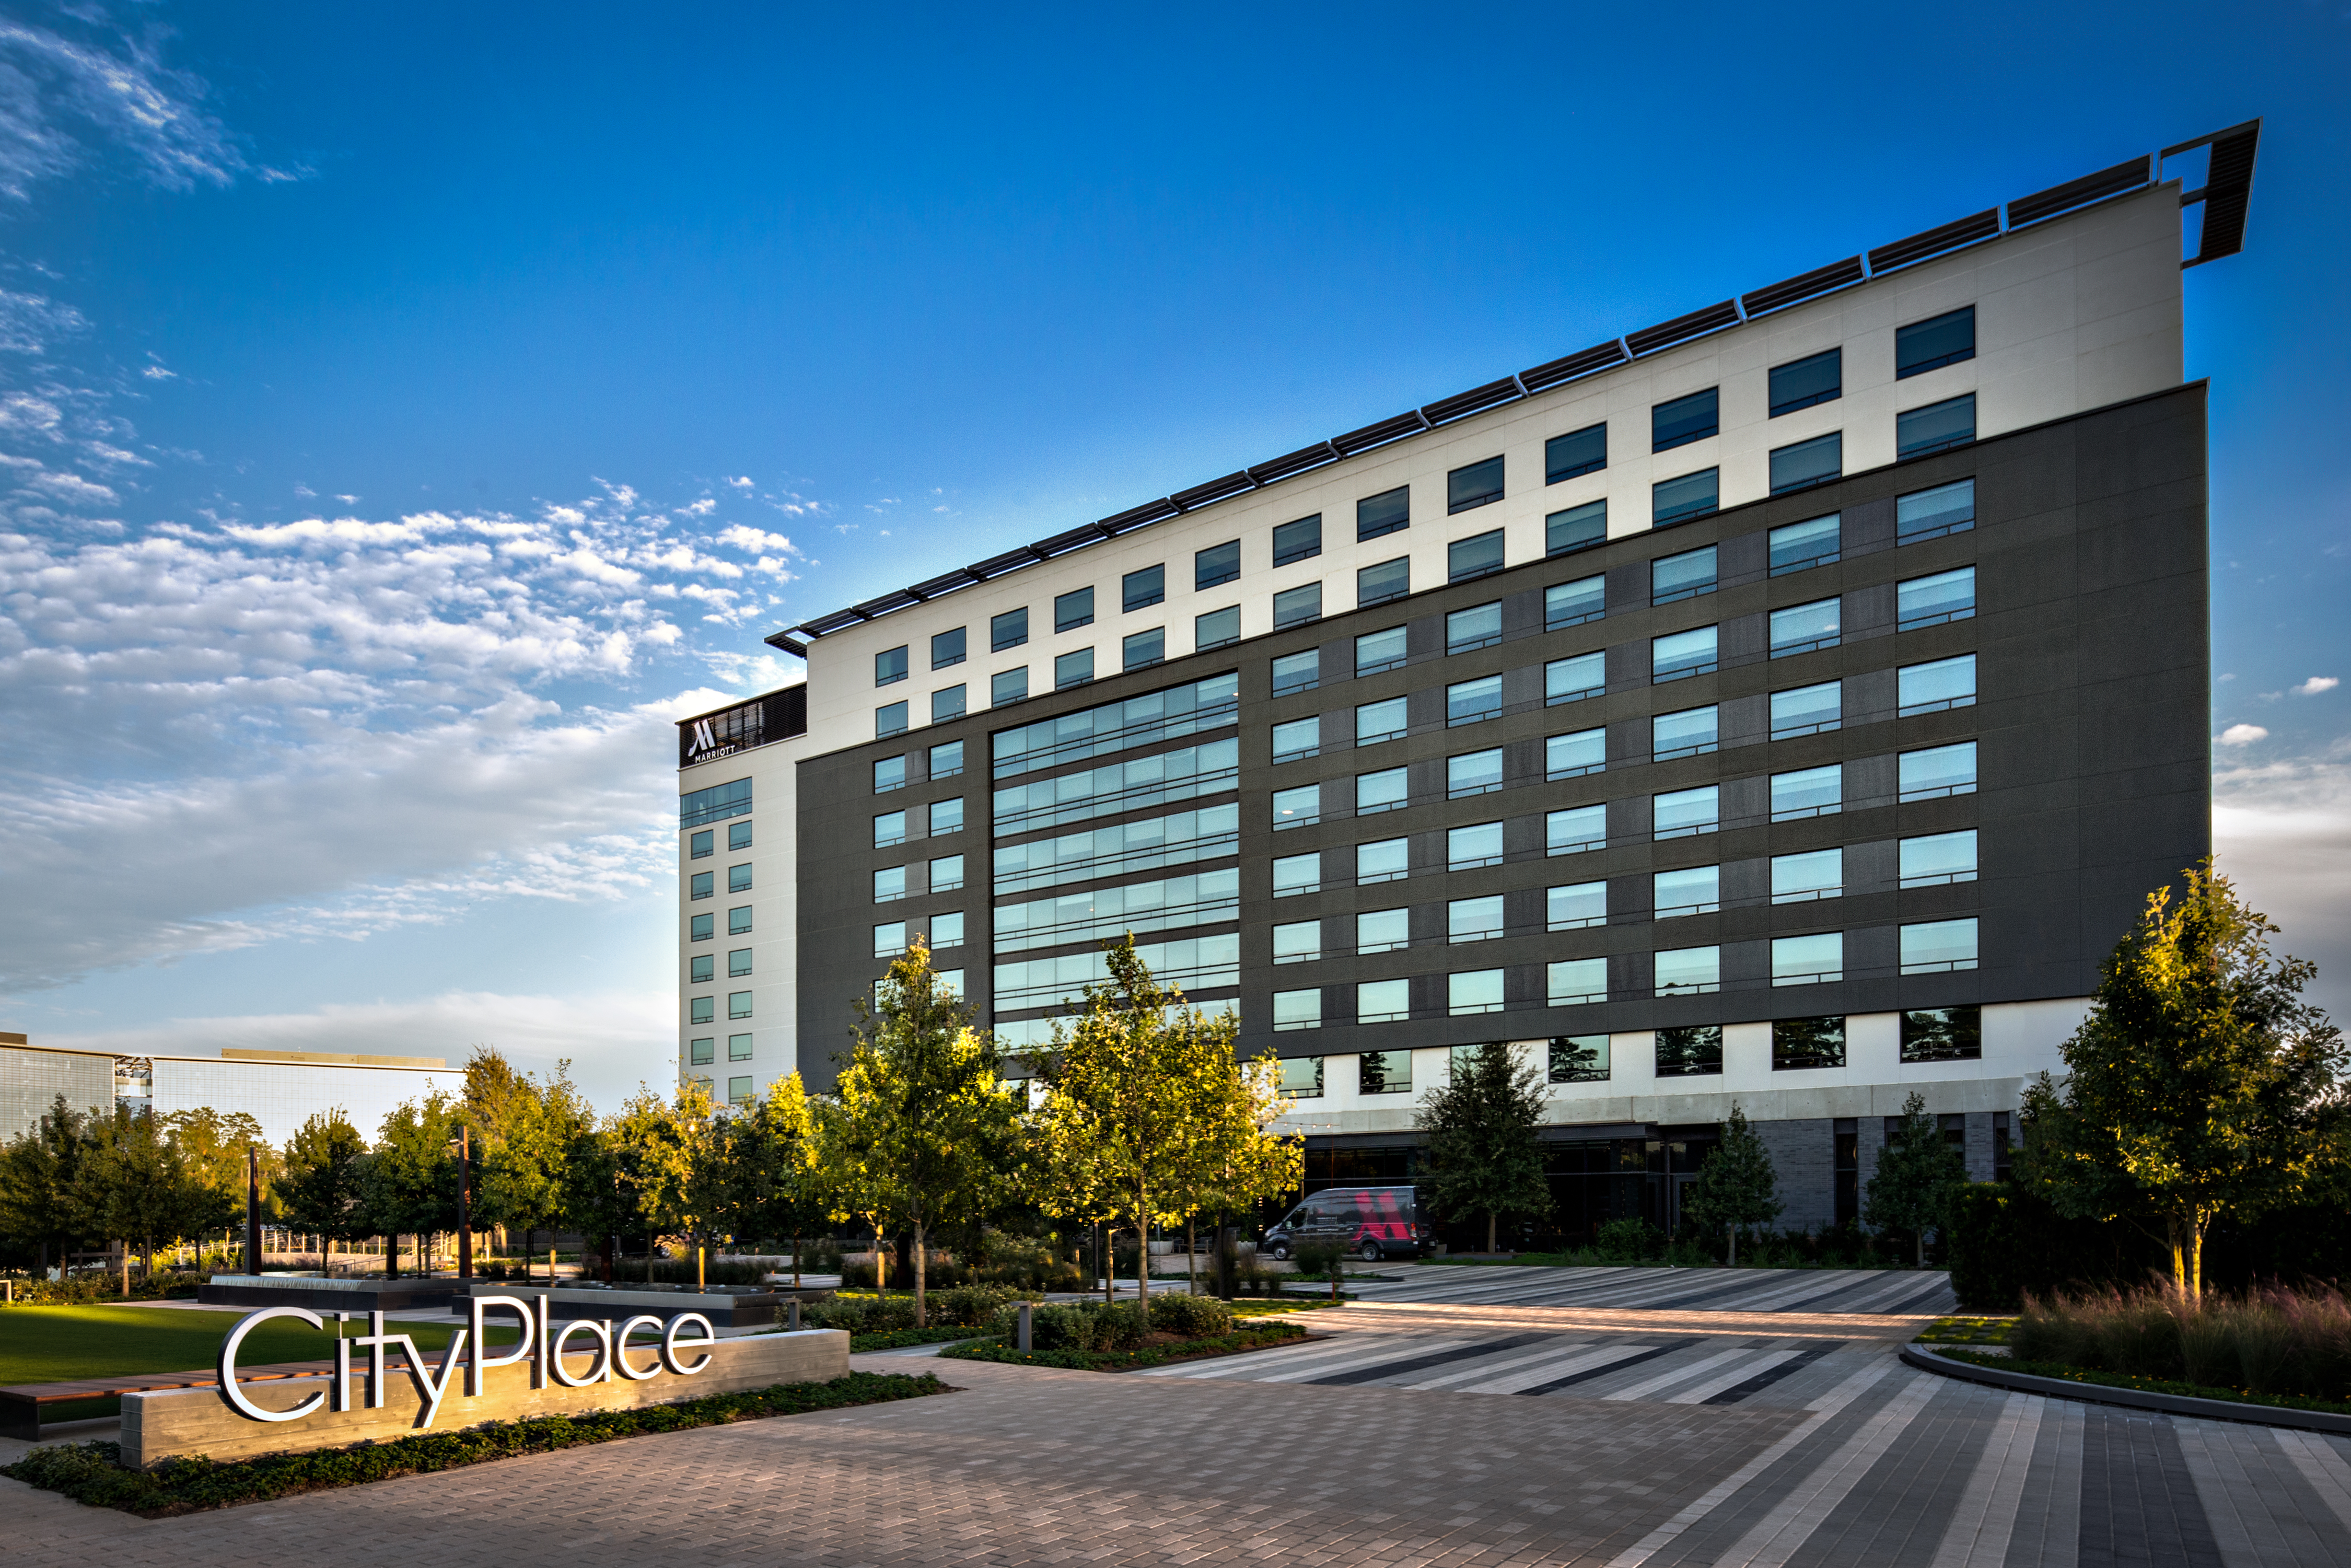 Photo of Marriott Houston CityPlace at Springwoods Village, Spring, TX